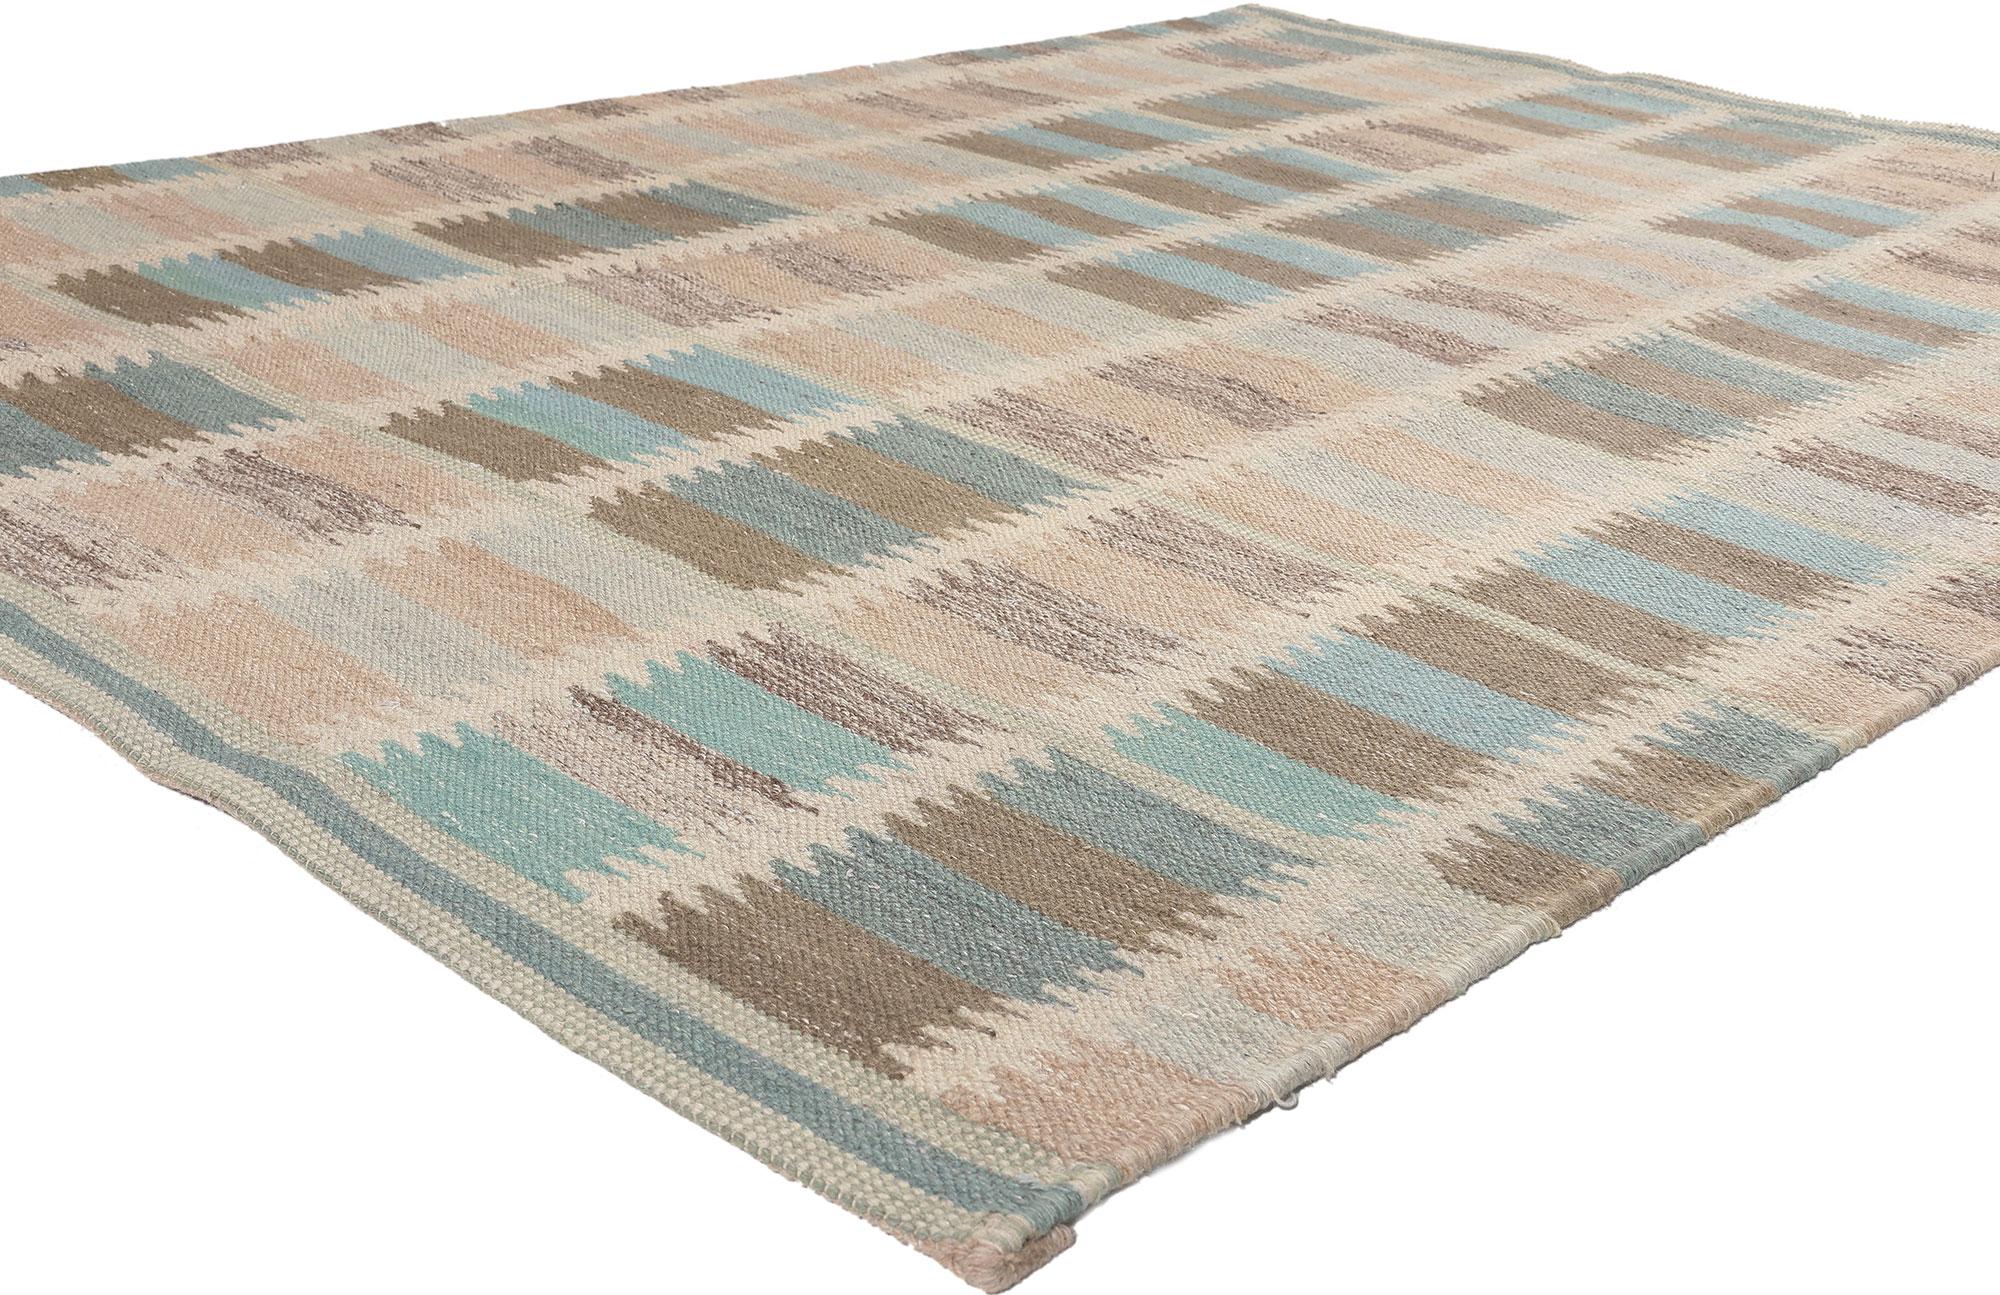 30693 Swedish Inspired Kilim Rug, 06'00 x 08'09.
Scandinavian Modern style meets earth-tone elegance in this handwoven Swedish inspired Kilim rug. The intrinsic geometric design and neutral earthy hues woven into this piece work together creating